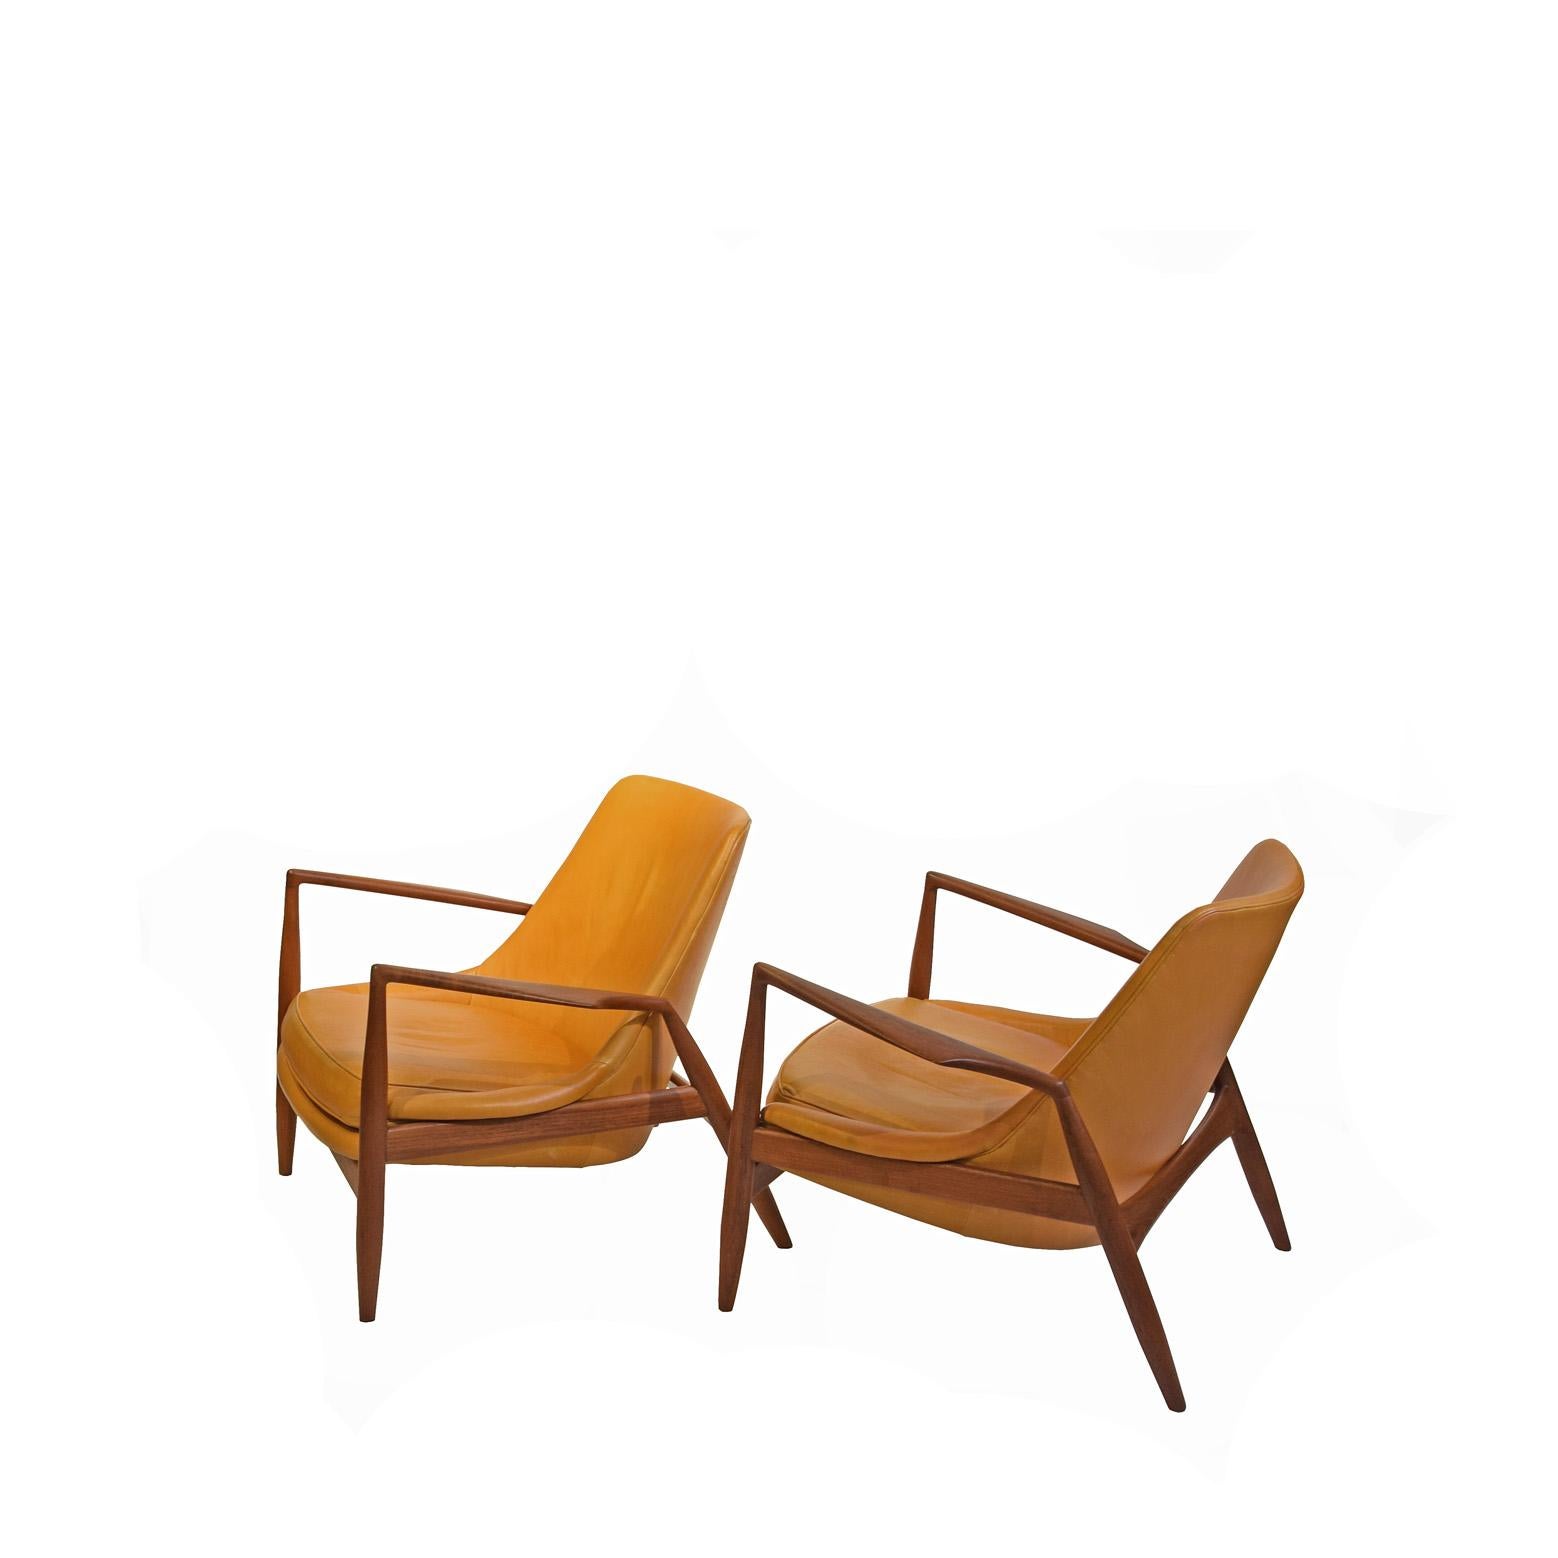 Solid teak Ib Kofod-Larsen for OPE Möbler, pair of (Seal) lounge chairs model 503-799, teak and leather, Sweden, 1956 newer leather upholstery.